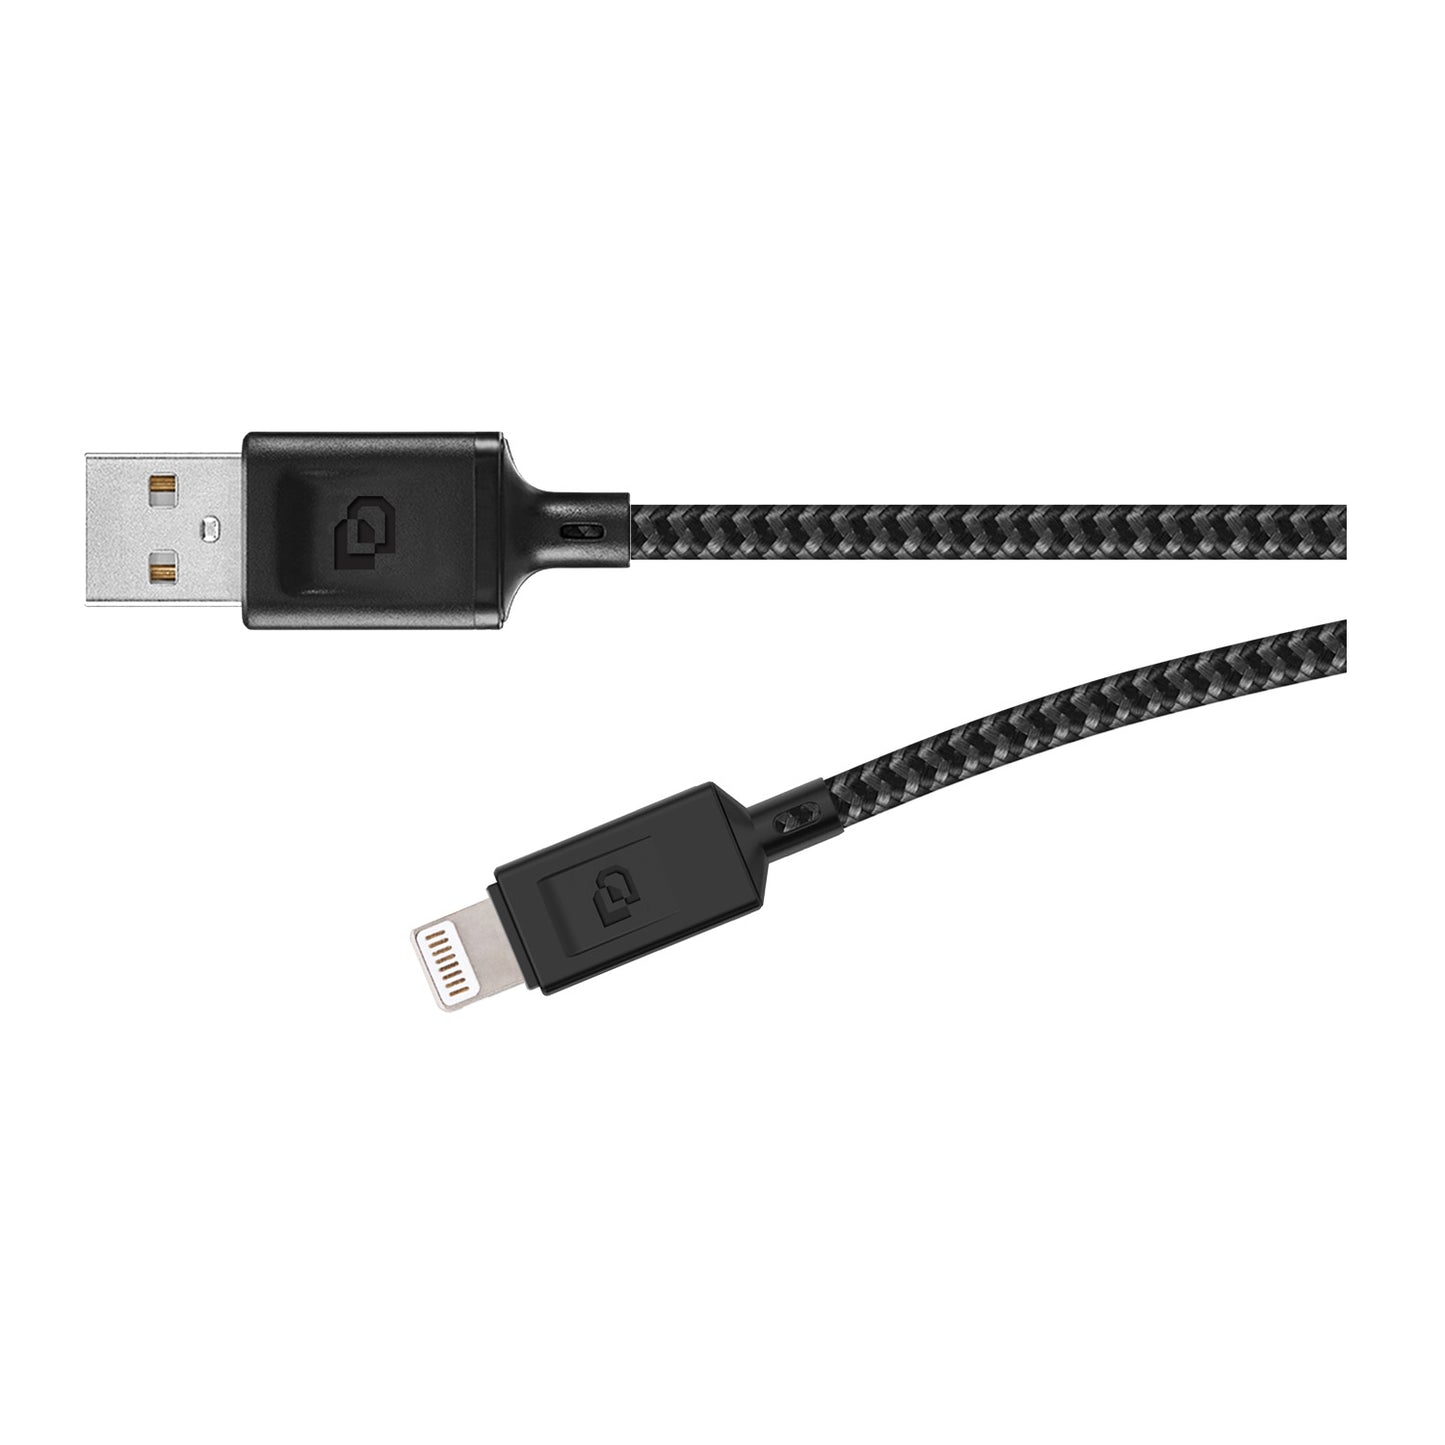 Cable USB a Lightning Rugged Dusted - Negro